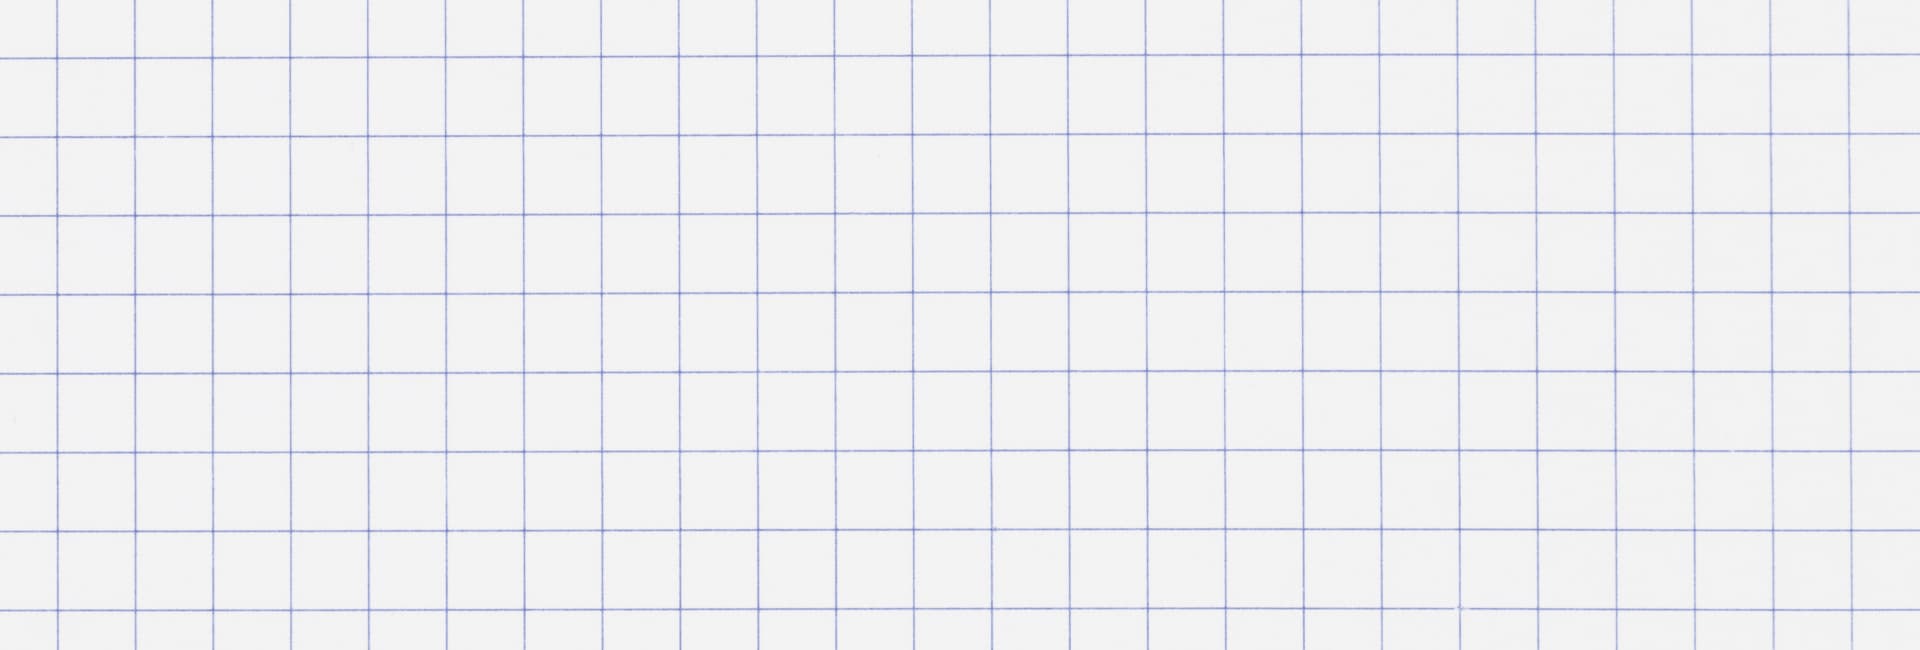 Graph Paper for Drawing Fence Layout in Order to Obtain an Estimate on Material